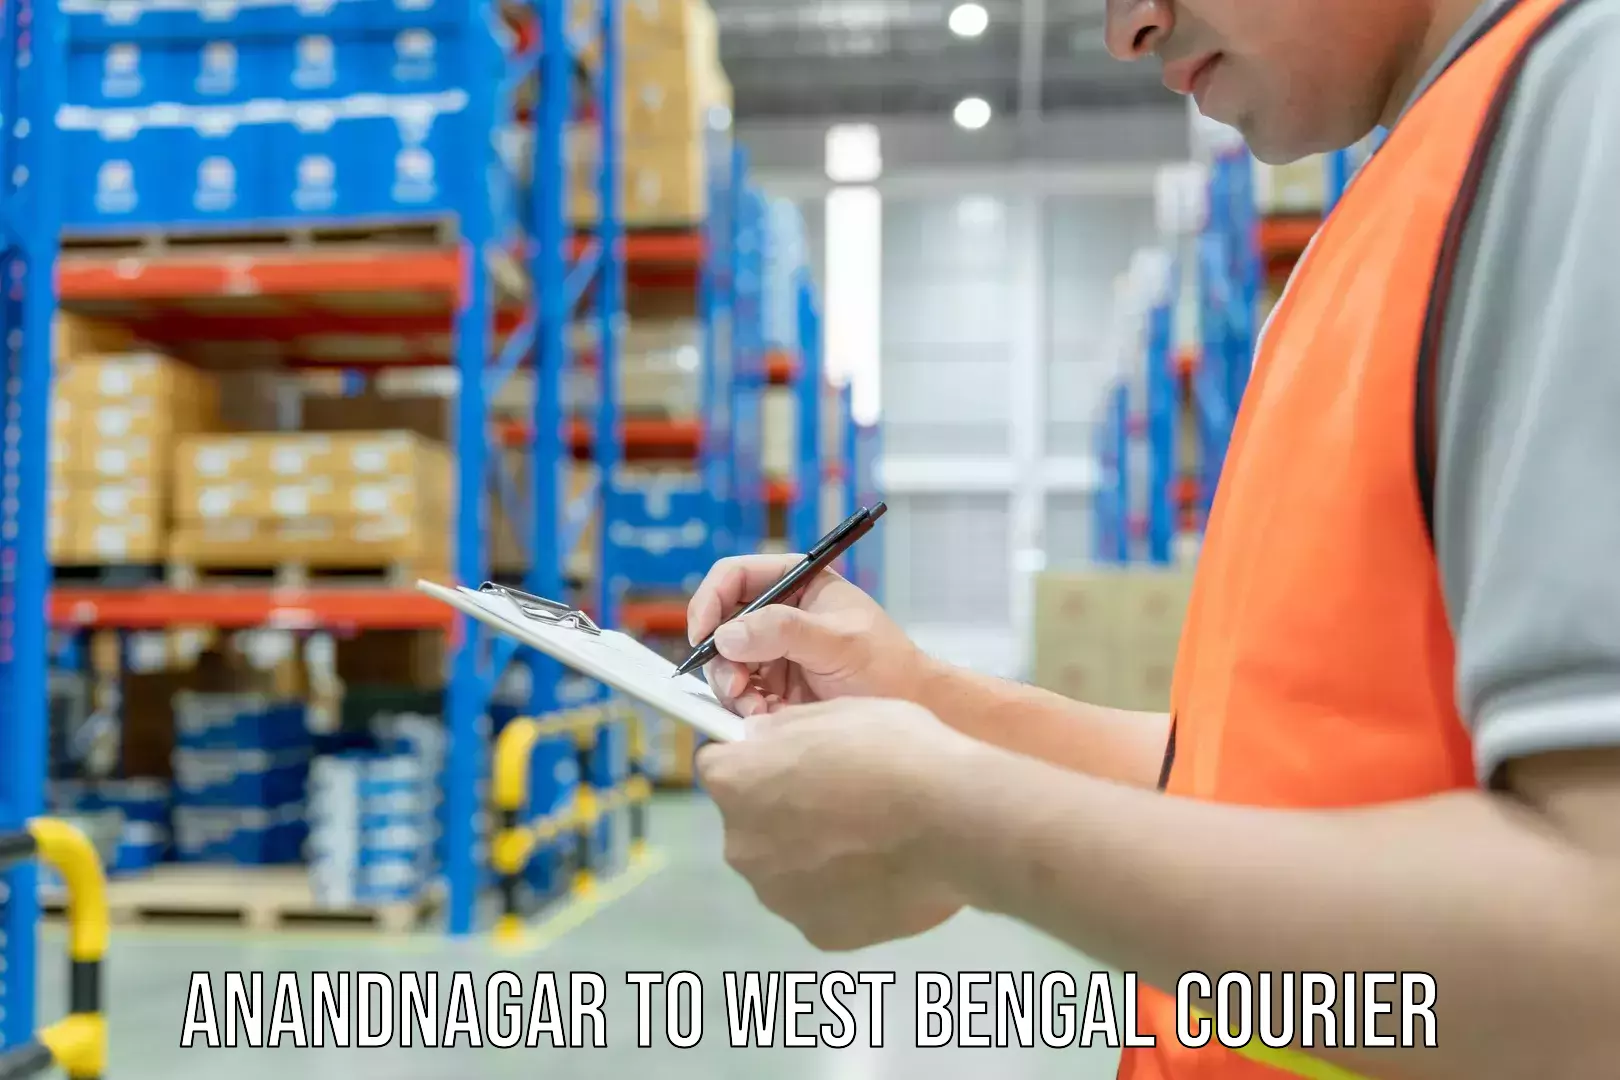 Parcel handling and care Anandnagar to West Bengal